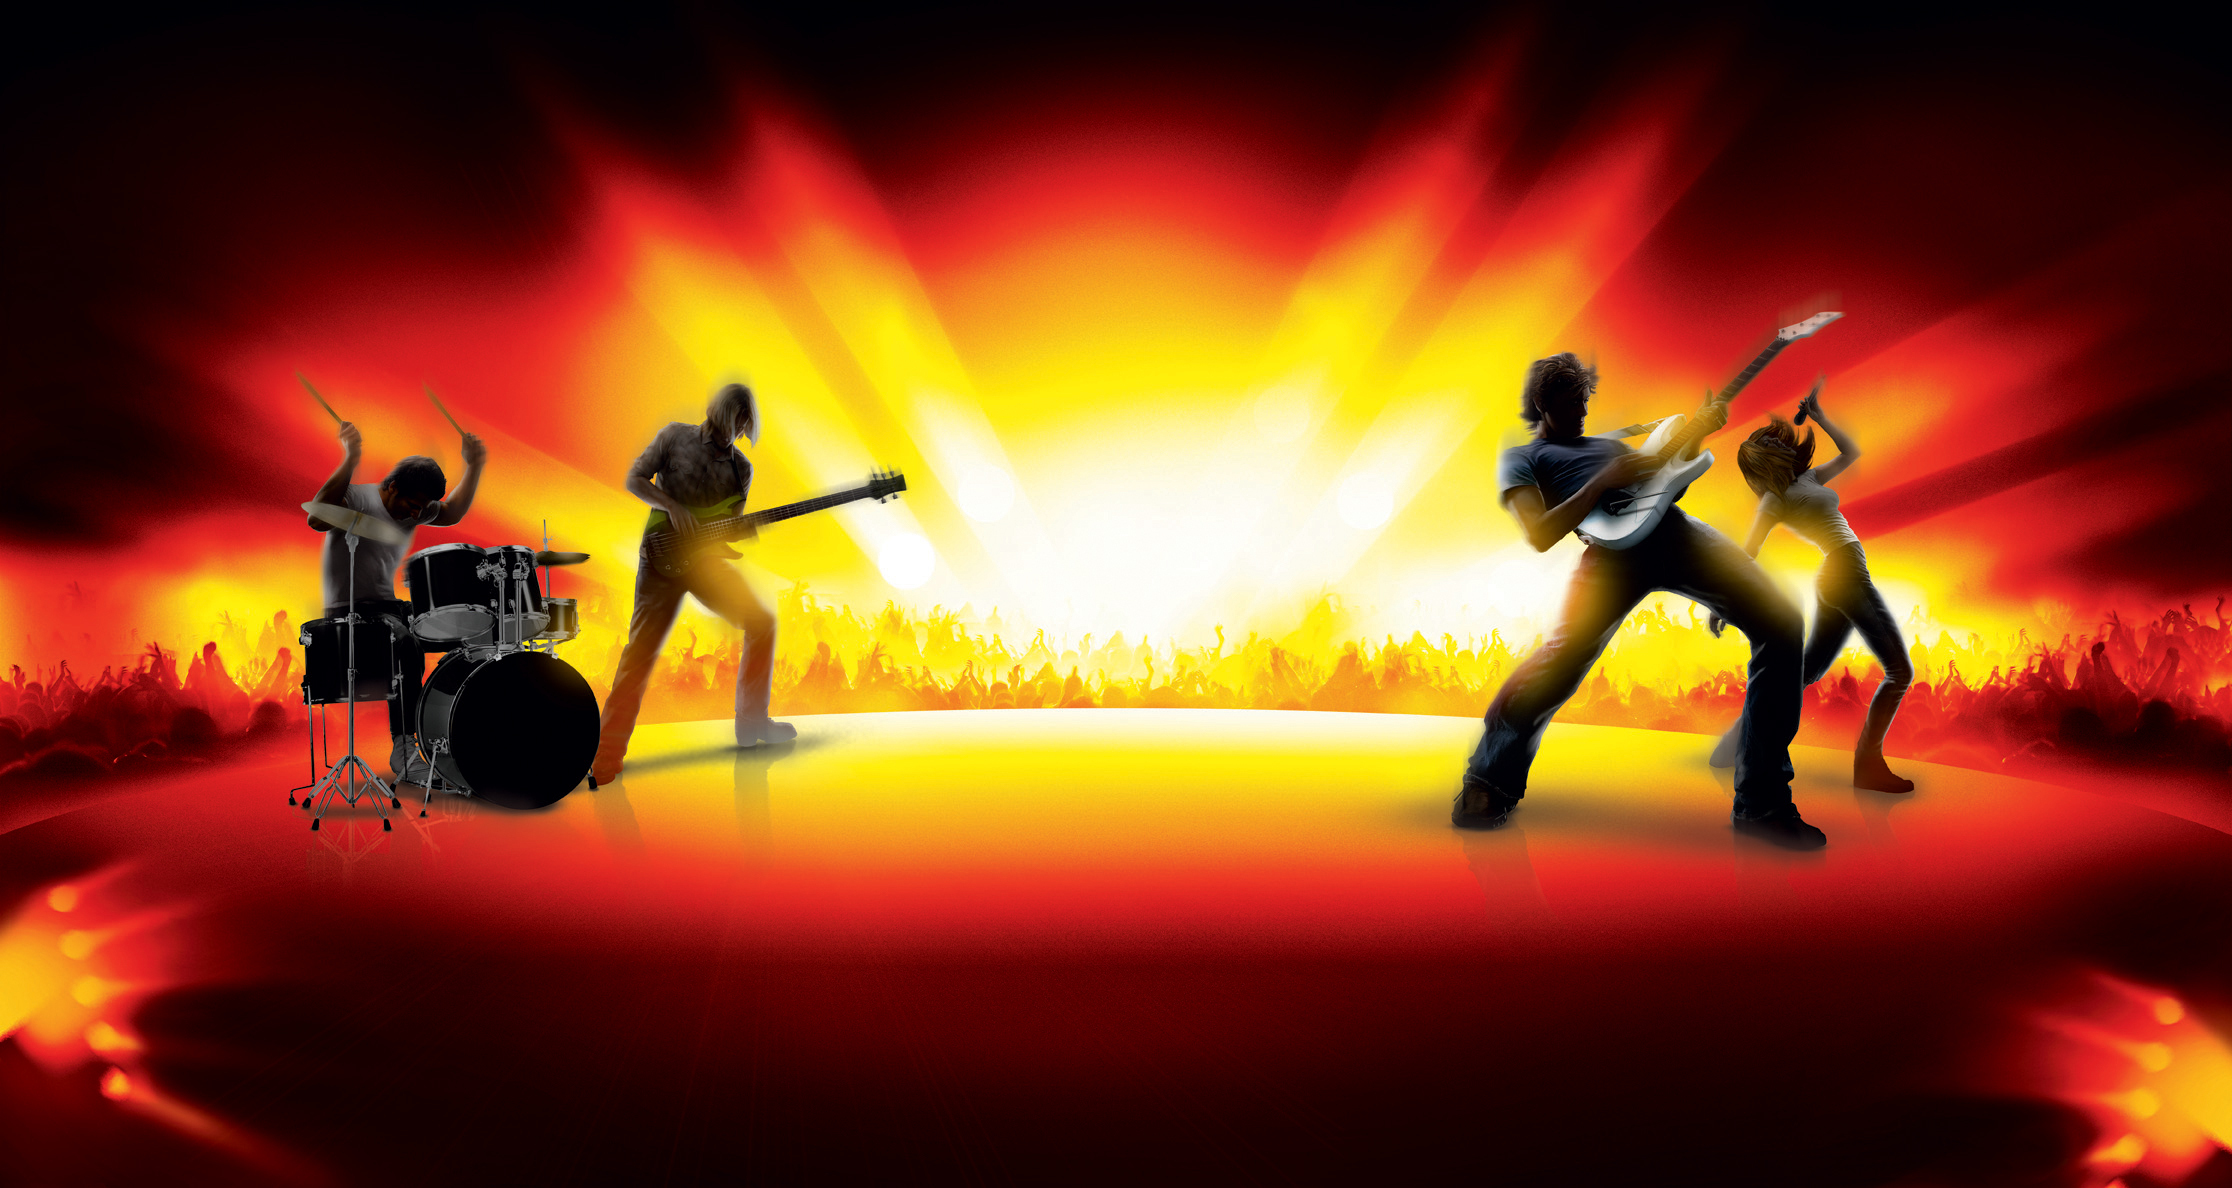 Guitar hero 4 images Background HD wallpaper and background photos 